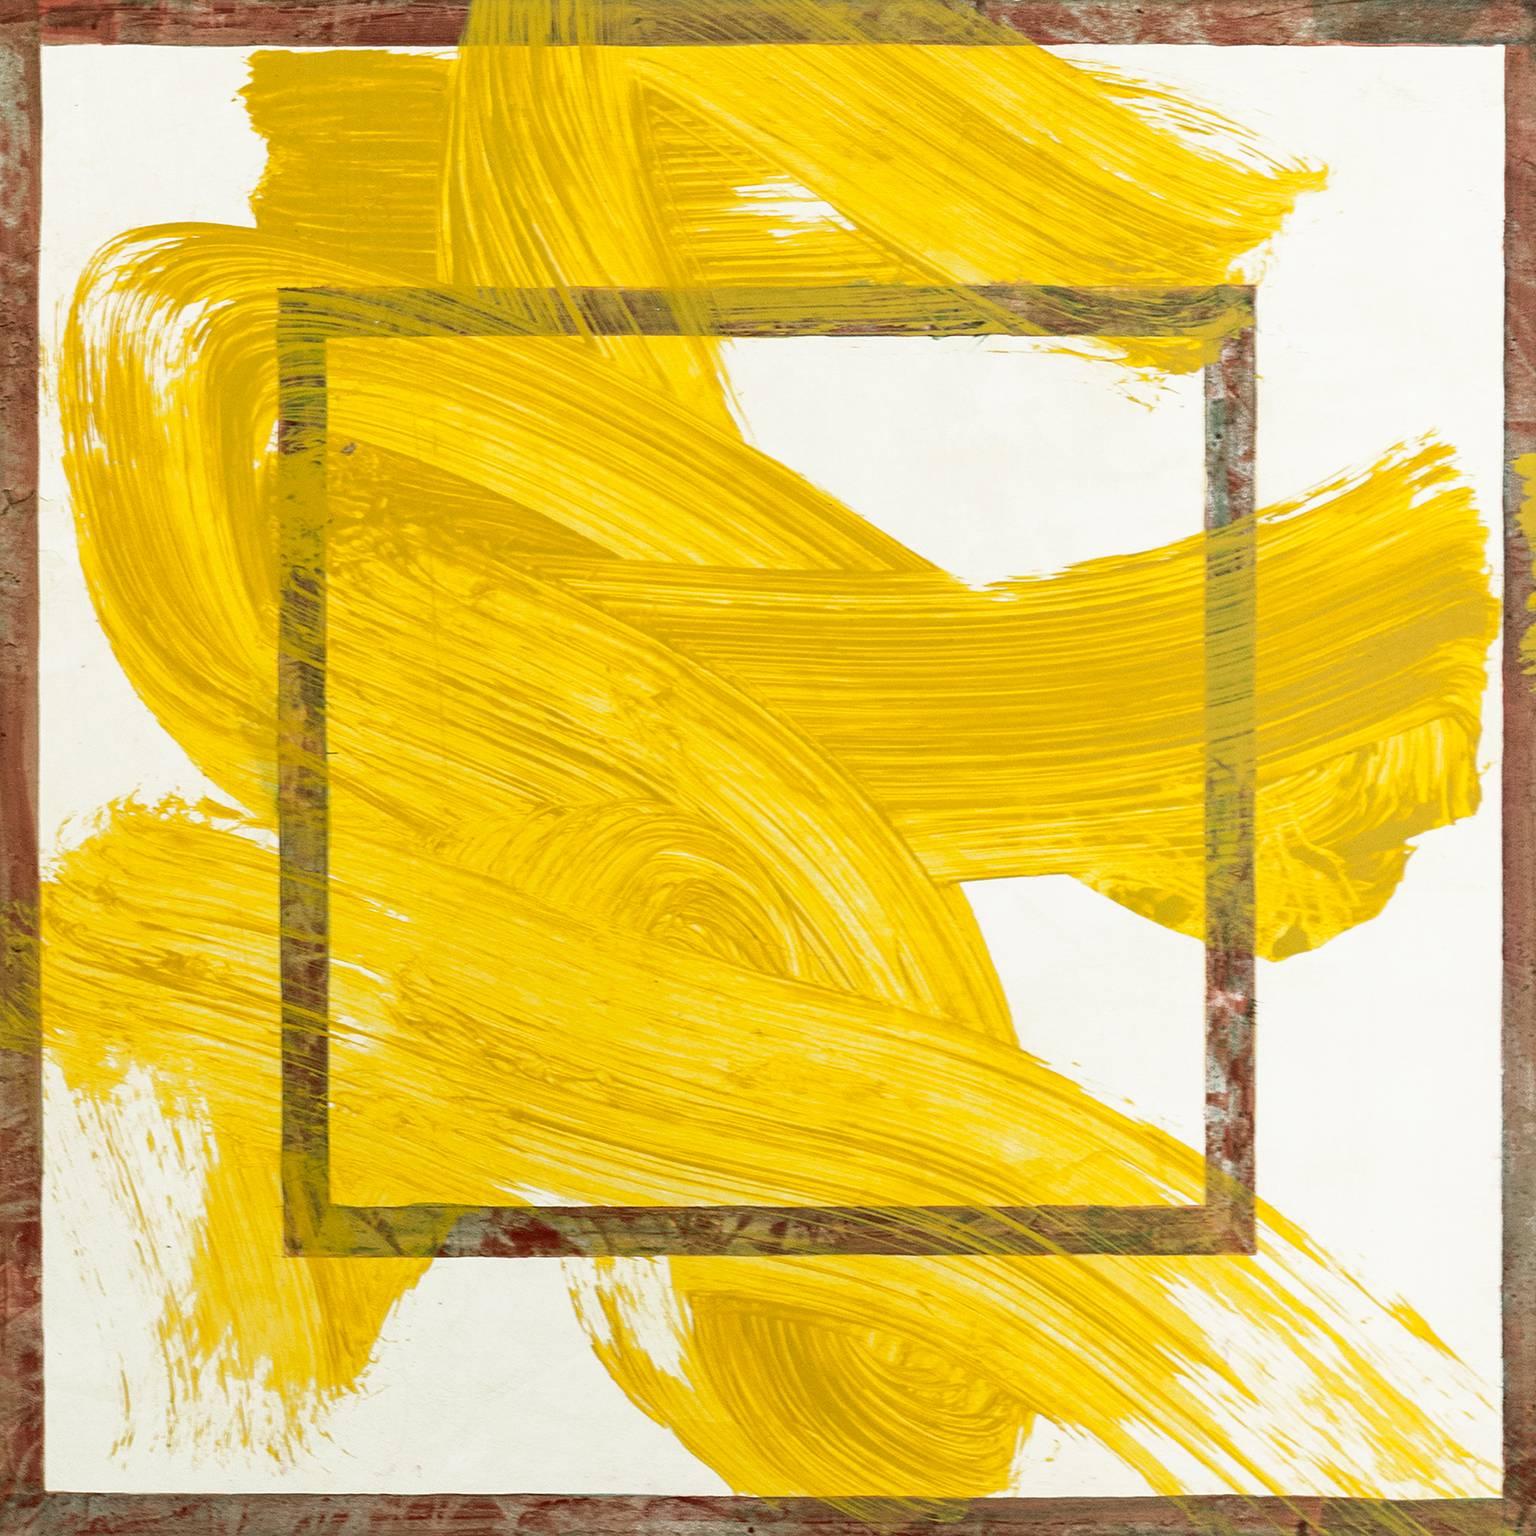 "REO 3", expressionistic painting on paper, geometric, yellow, deep red. - Art by Joseph Haske